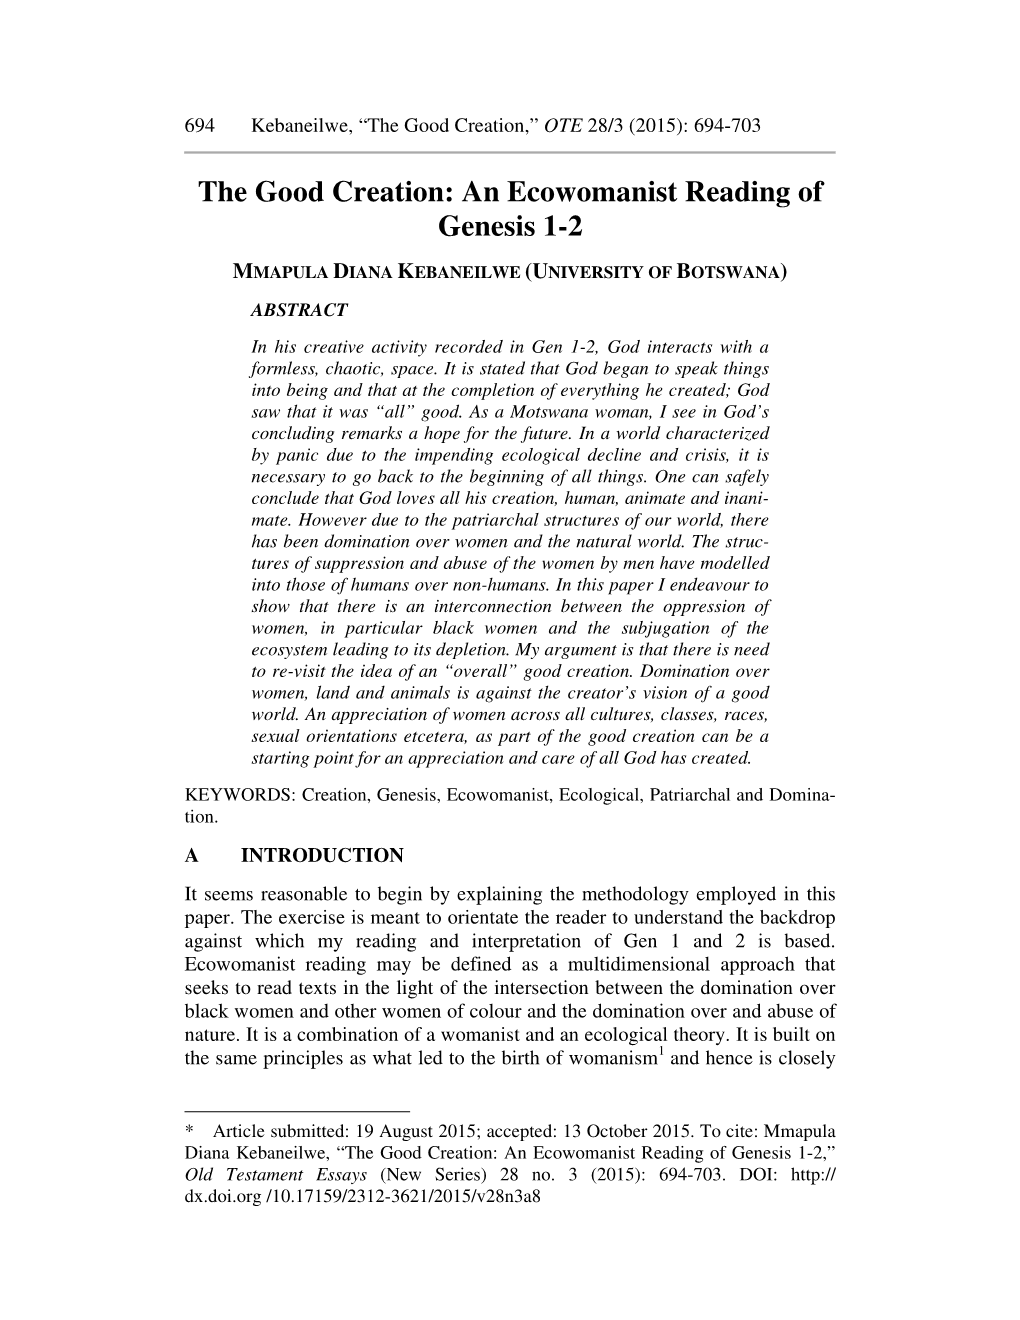 The Good Creation: an Ecowomanist Reading of Genesis 1-2